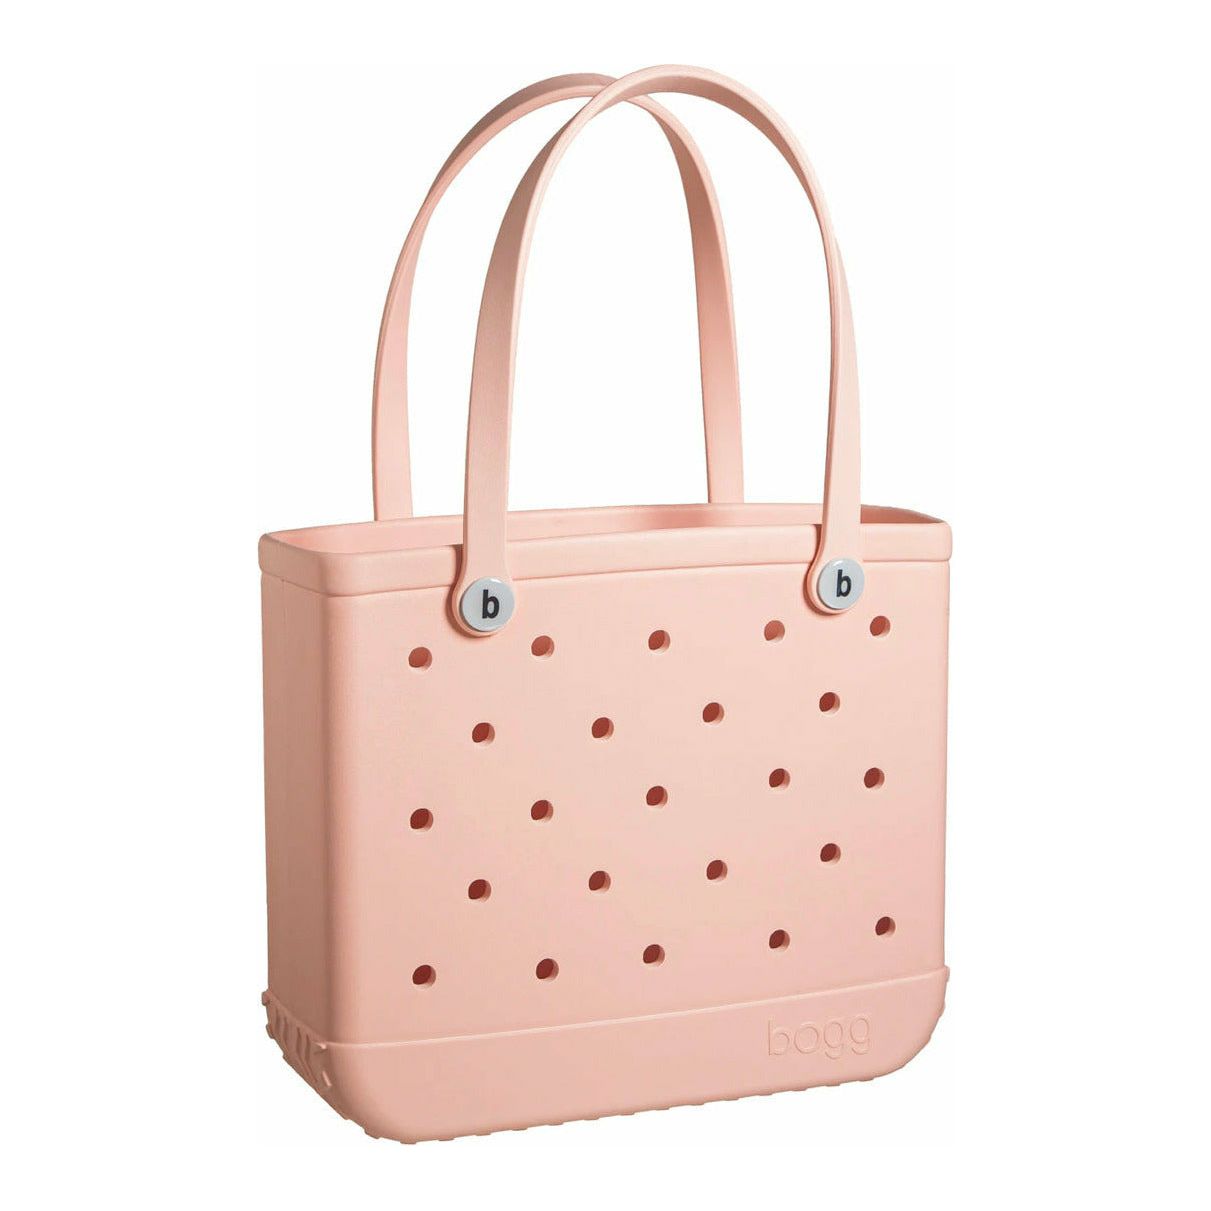 BOGG BAG Anchor Tote Bags for Women